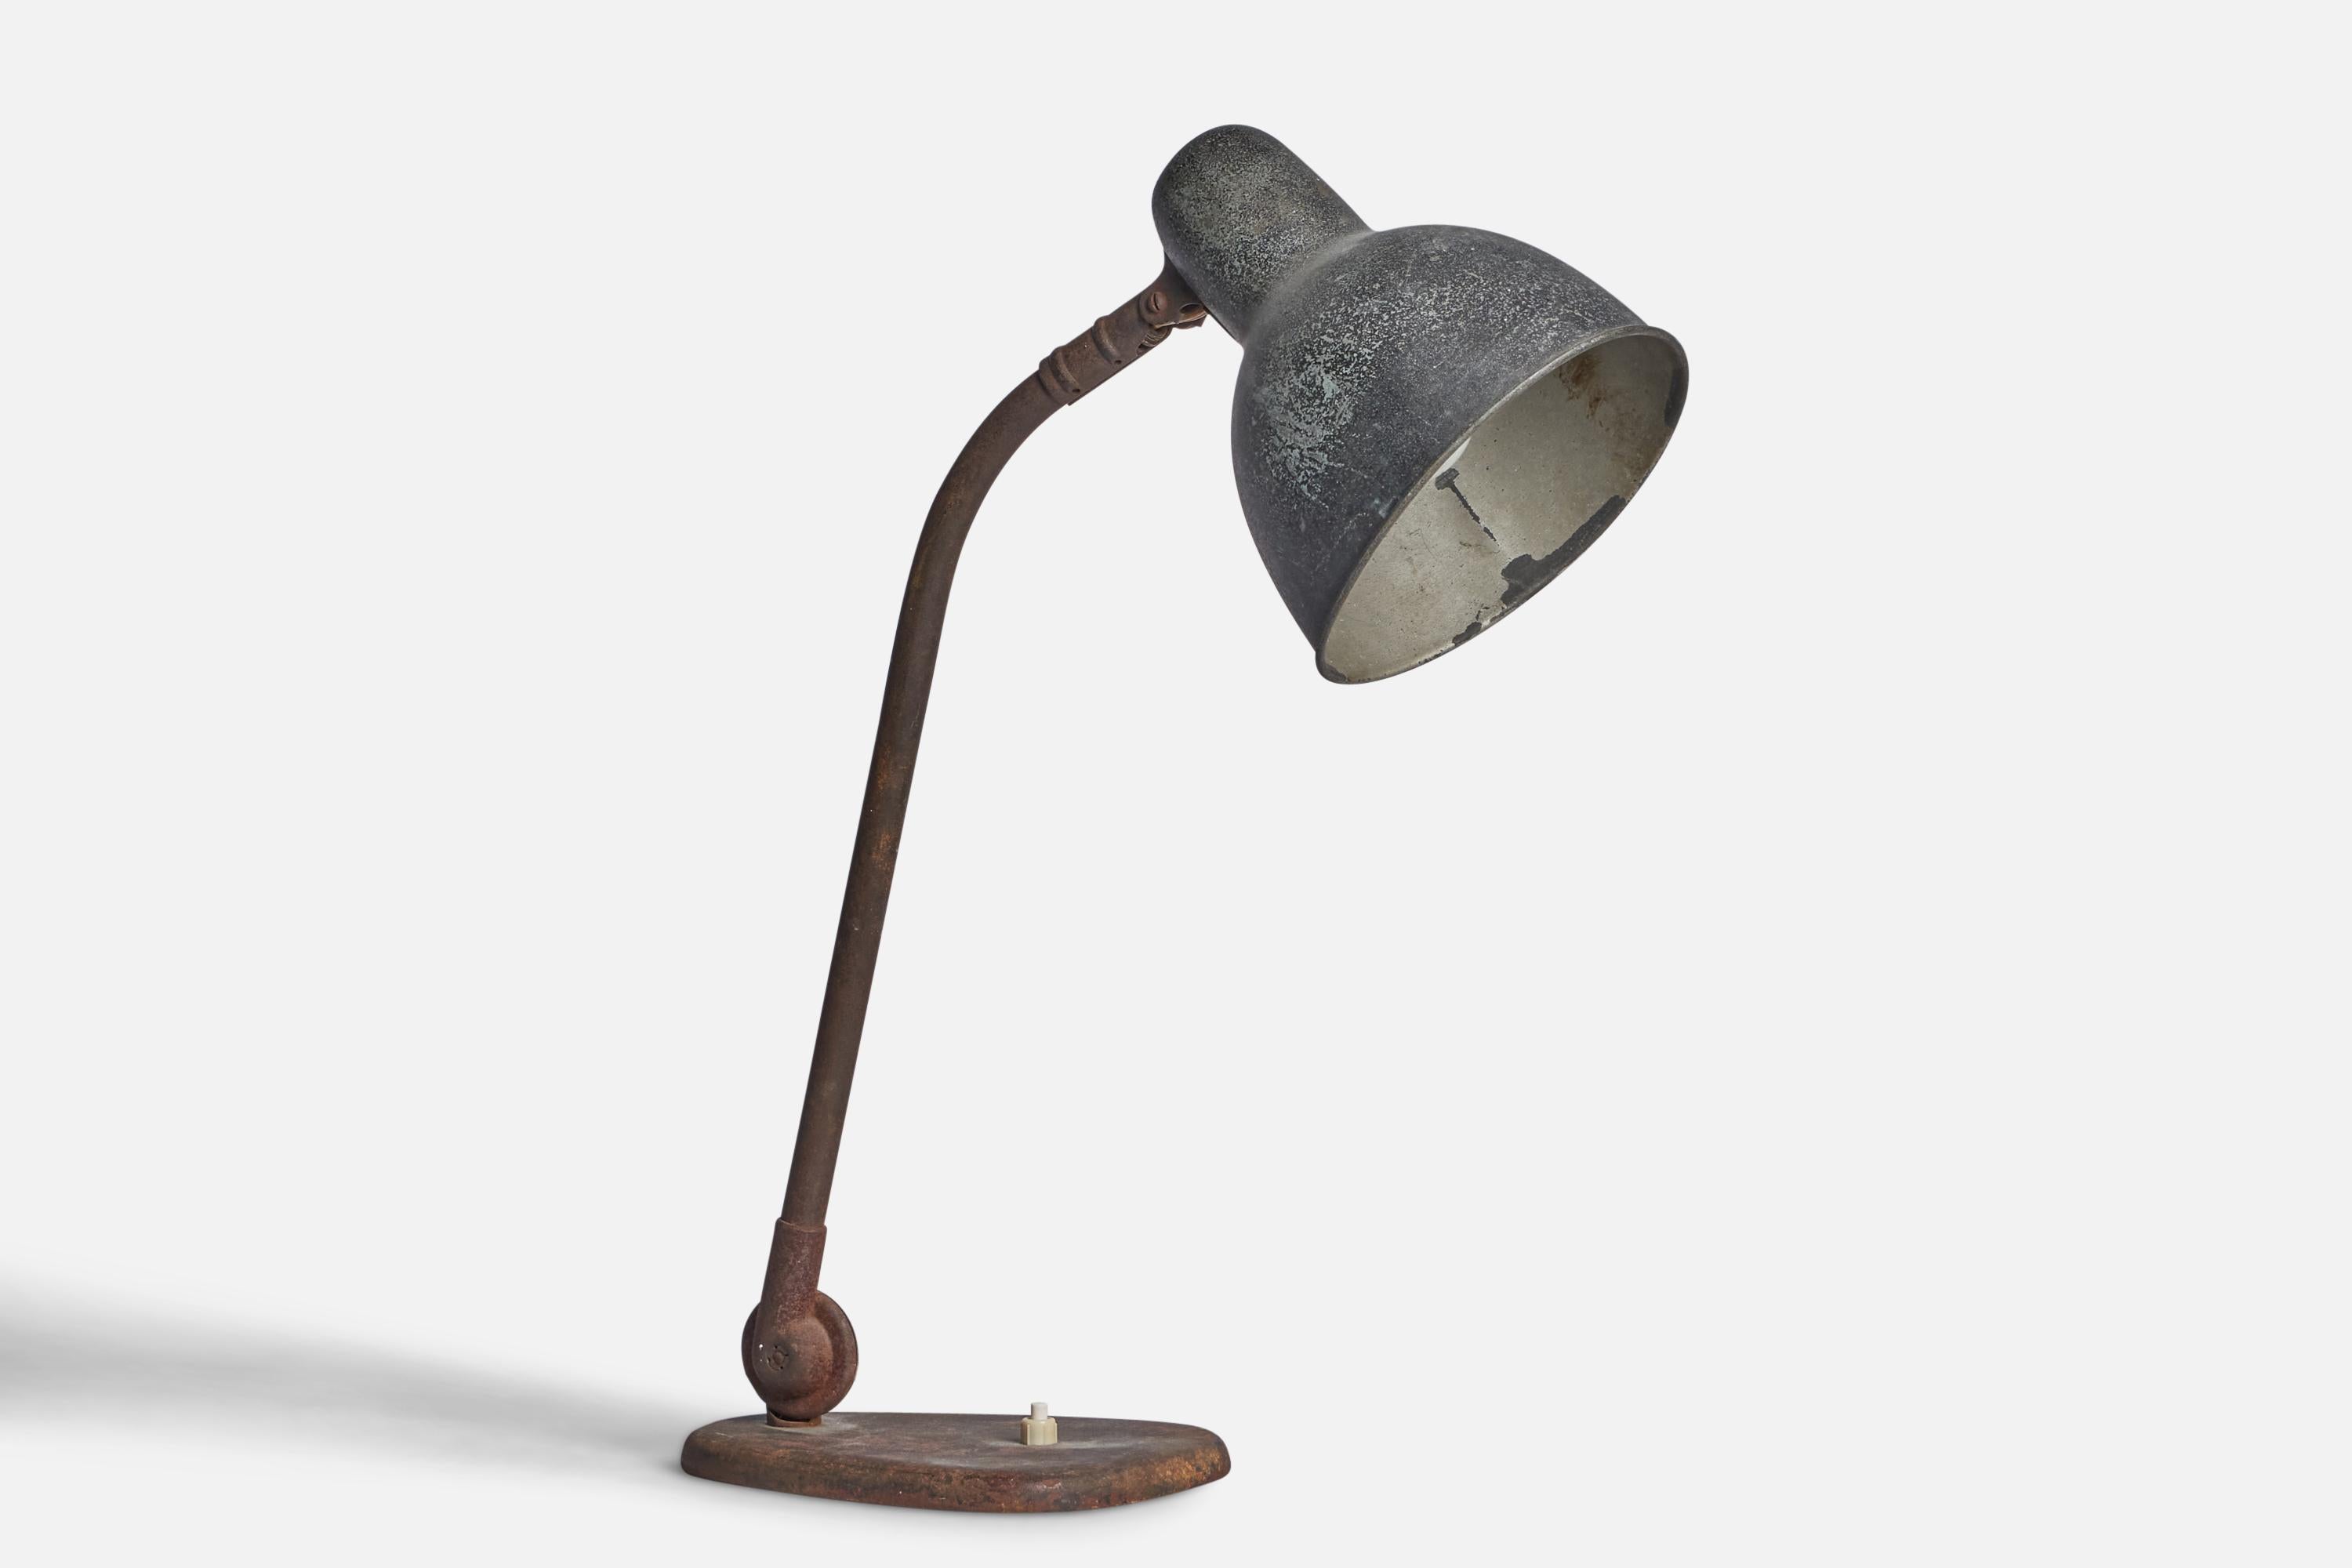 An adjustable metal table lamp designed and produced in Germany, 1930s.

Dimensions of Lamp (inches): 18.9” H x 5.8” W x 13.25” D
Dimensions variable based on position of light
Bulb Specifications: E-26 Bulb
Number of Sockets: 1
All lighting will be